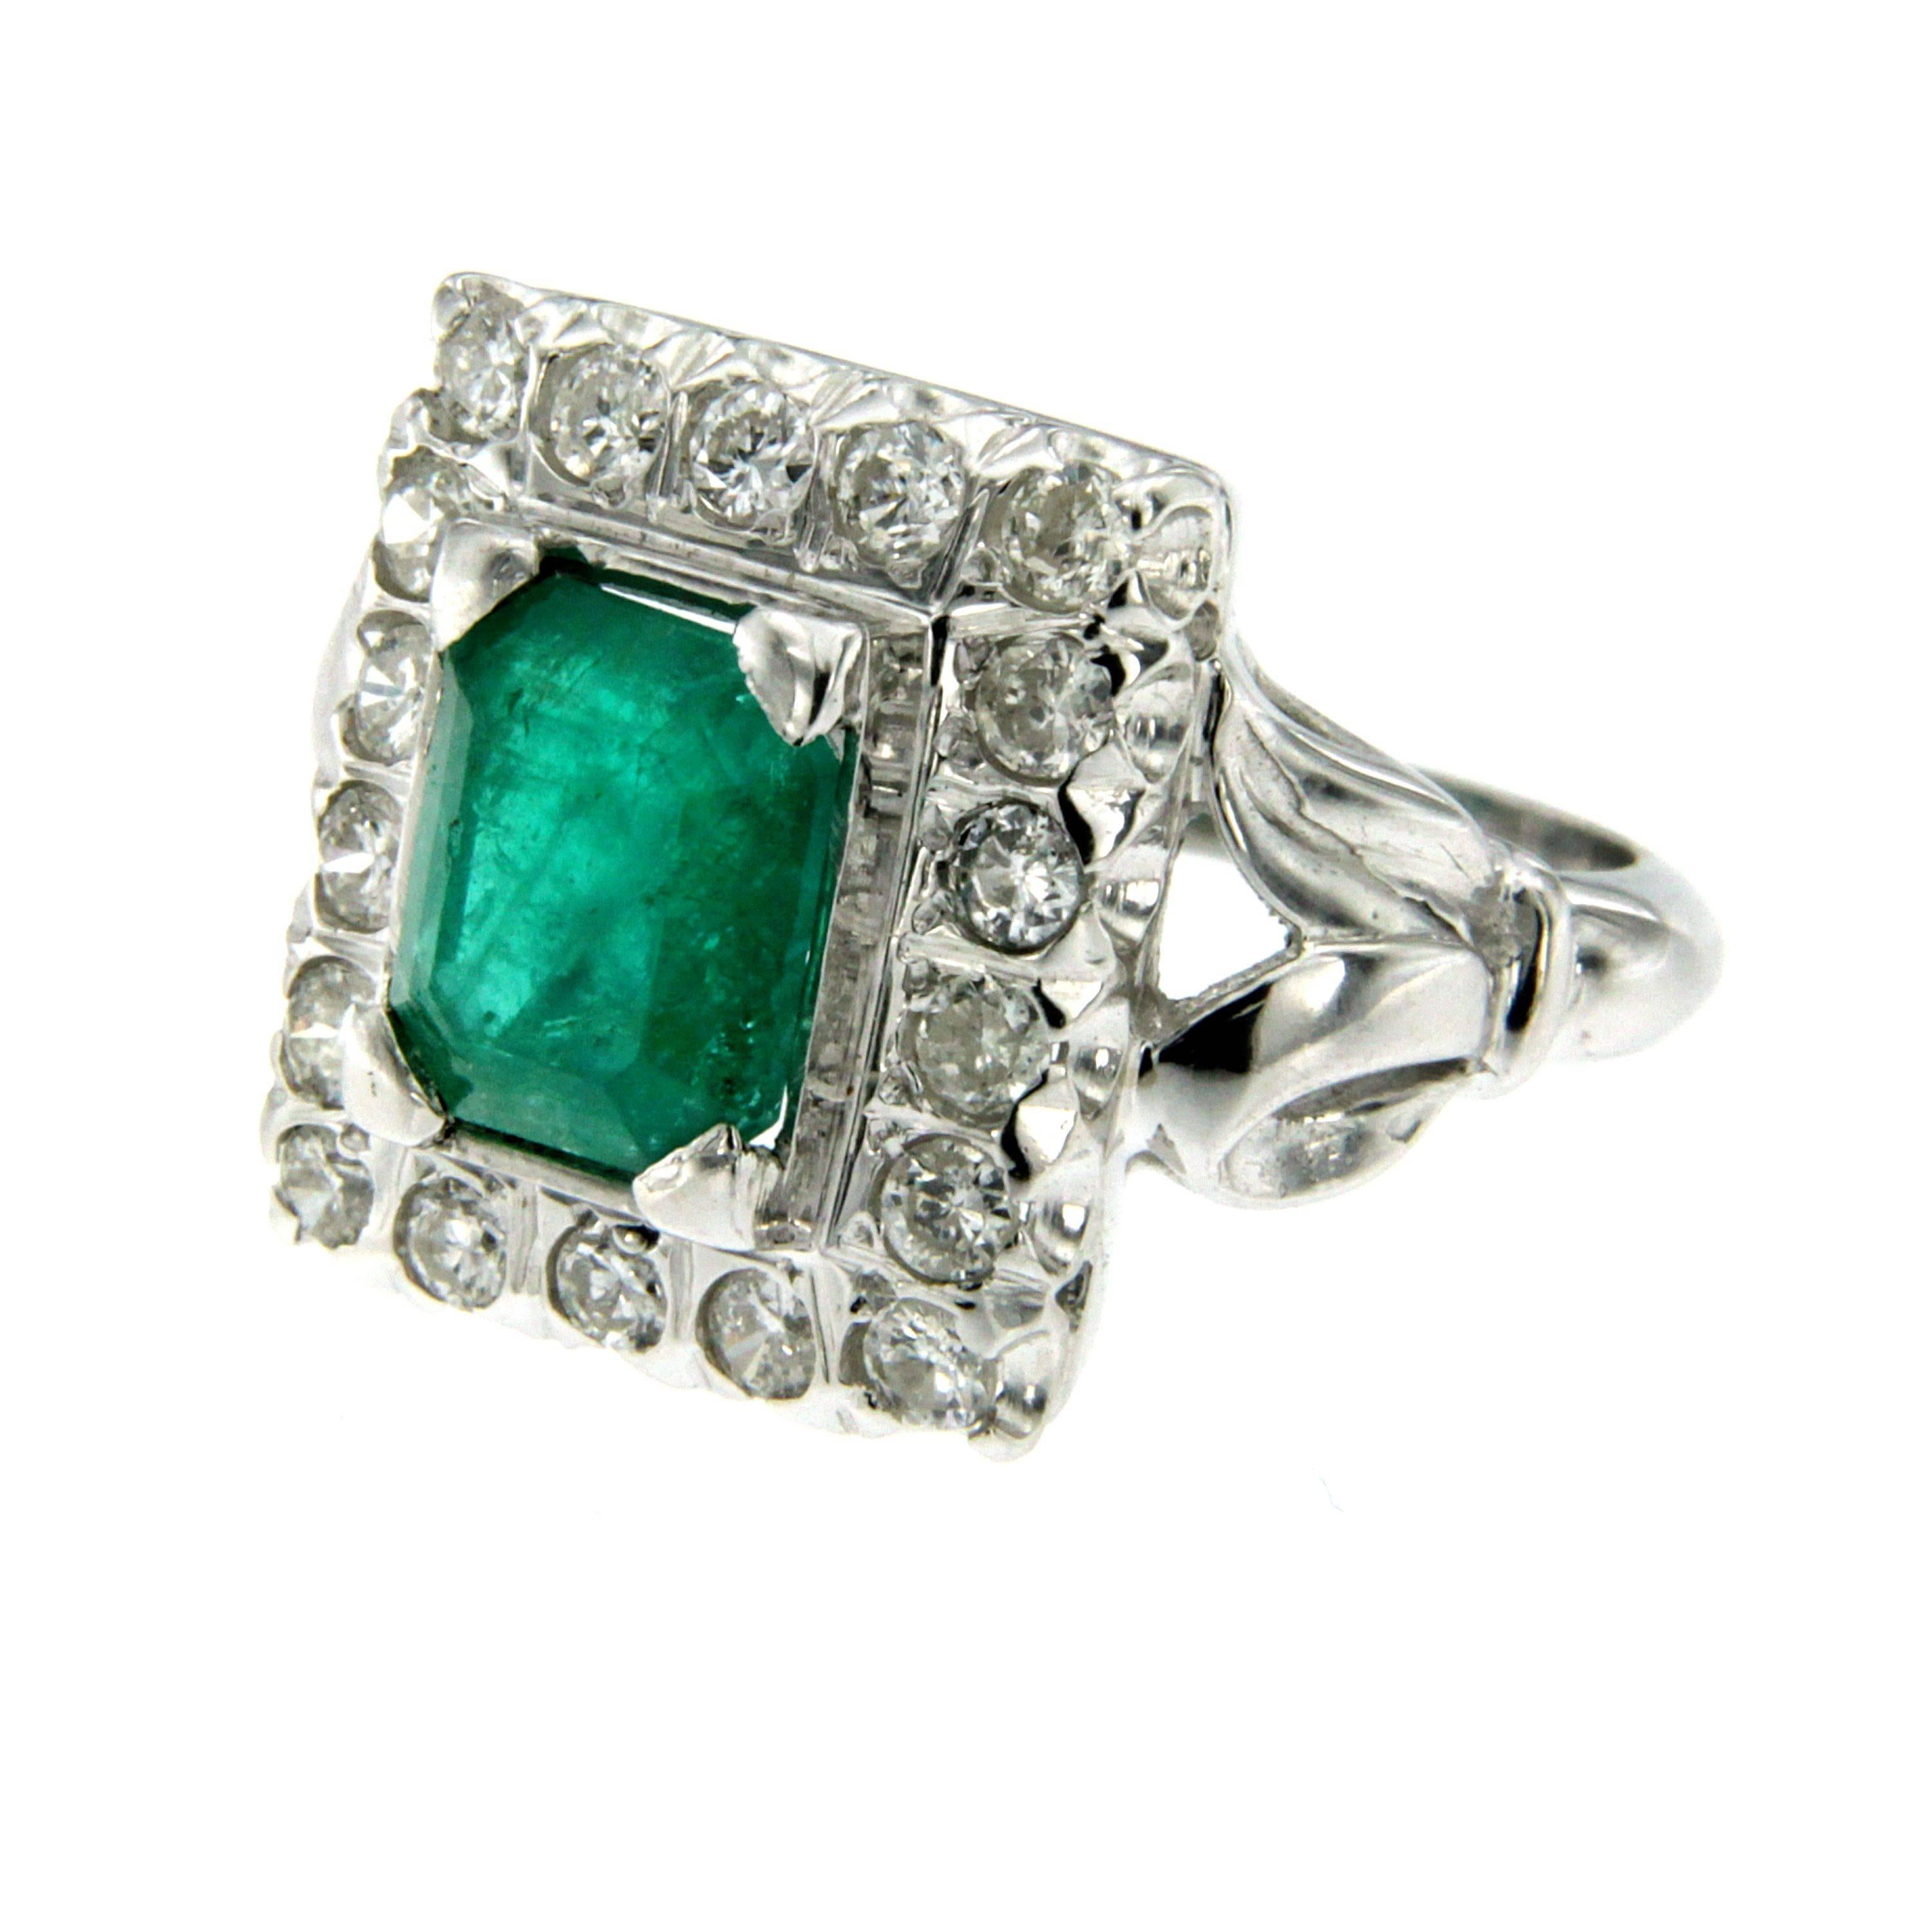 A beautiful 18k white gold mount showcasing an emerald-cut Colombian Emerald weighing approx. 2.20 carats, framed by 18 fine quality, round brilliant-cut diamonds weighing 0.90 cts graded G color and VS clarity.
Circa 1950

CONDITION: Pre-owned -